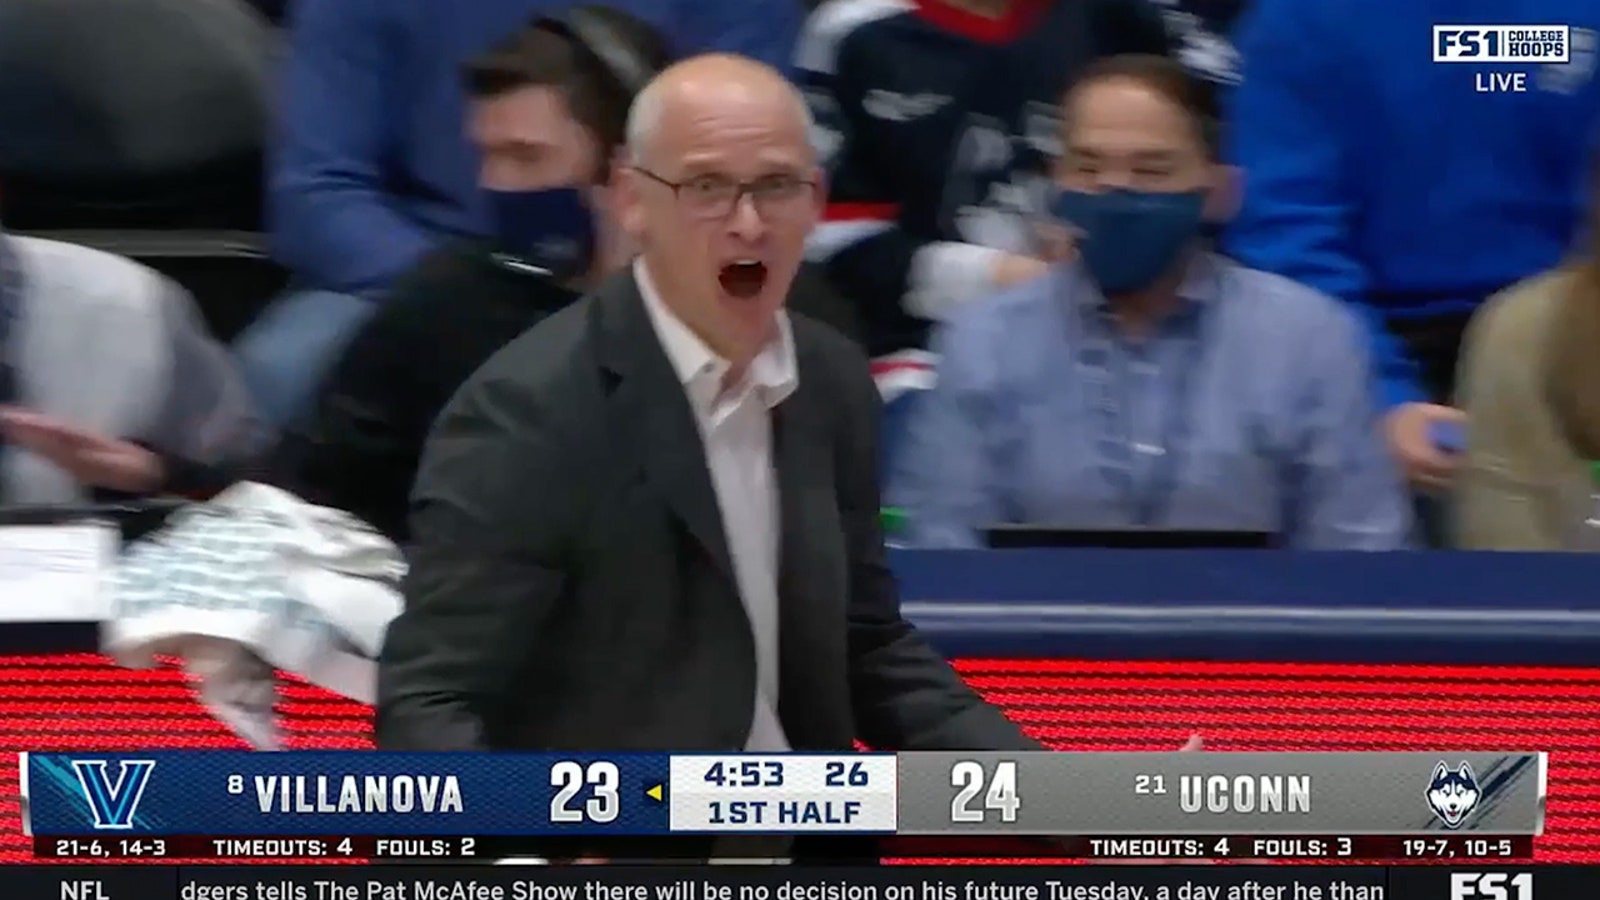 Dan Hurley throws a tantrum after being ejected